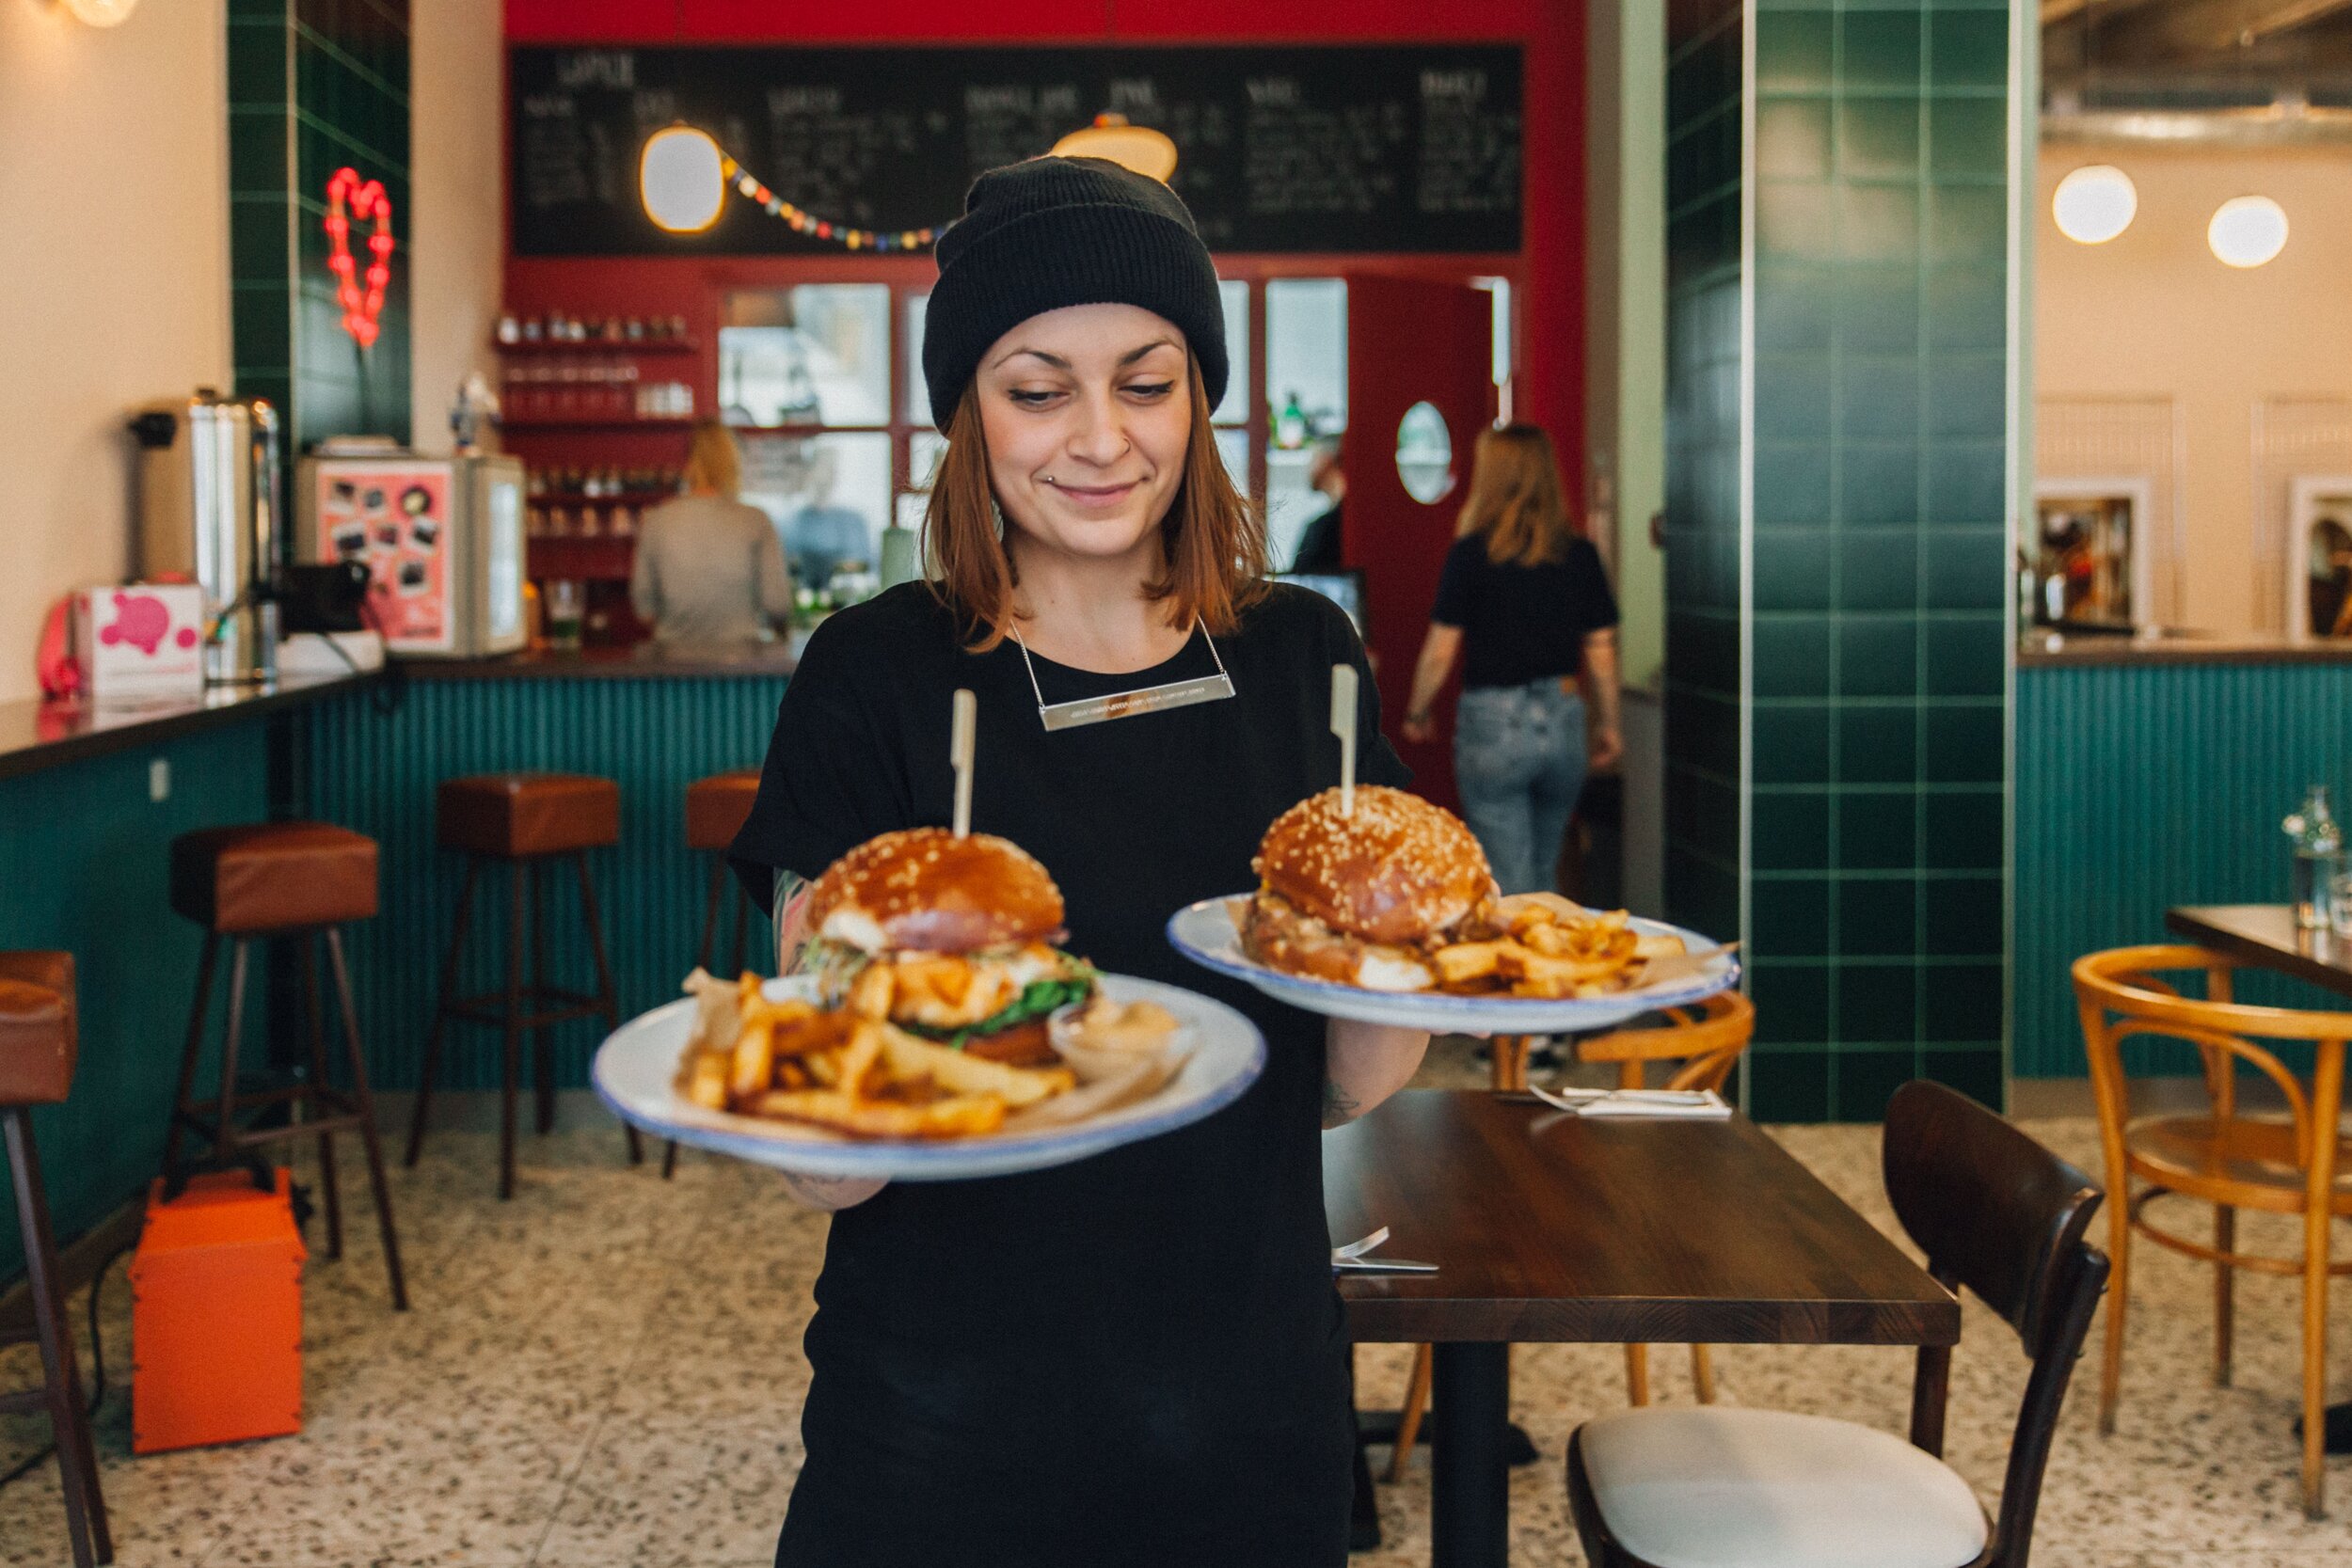 business-holding-restaurant-working-burger-young-woman-smile-work-junk-food-waitress_t20_E0P7A1.jpg